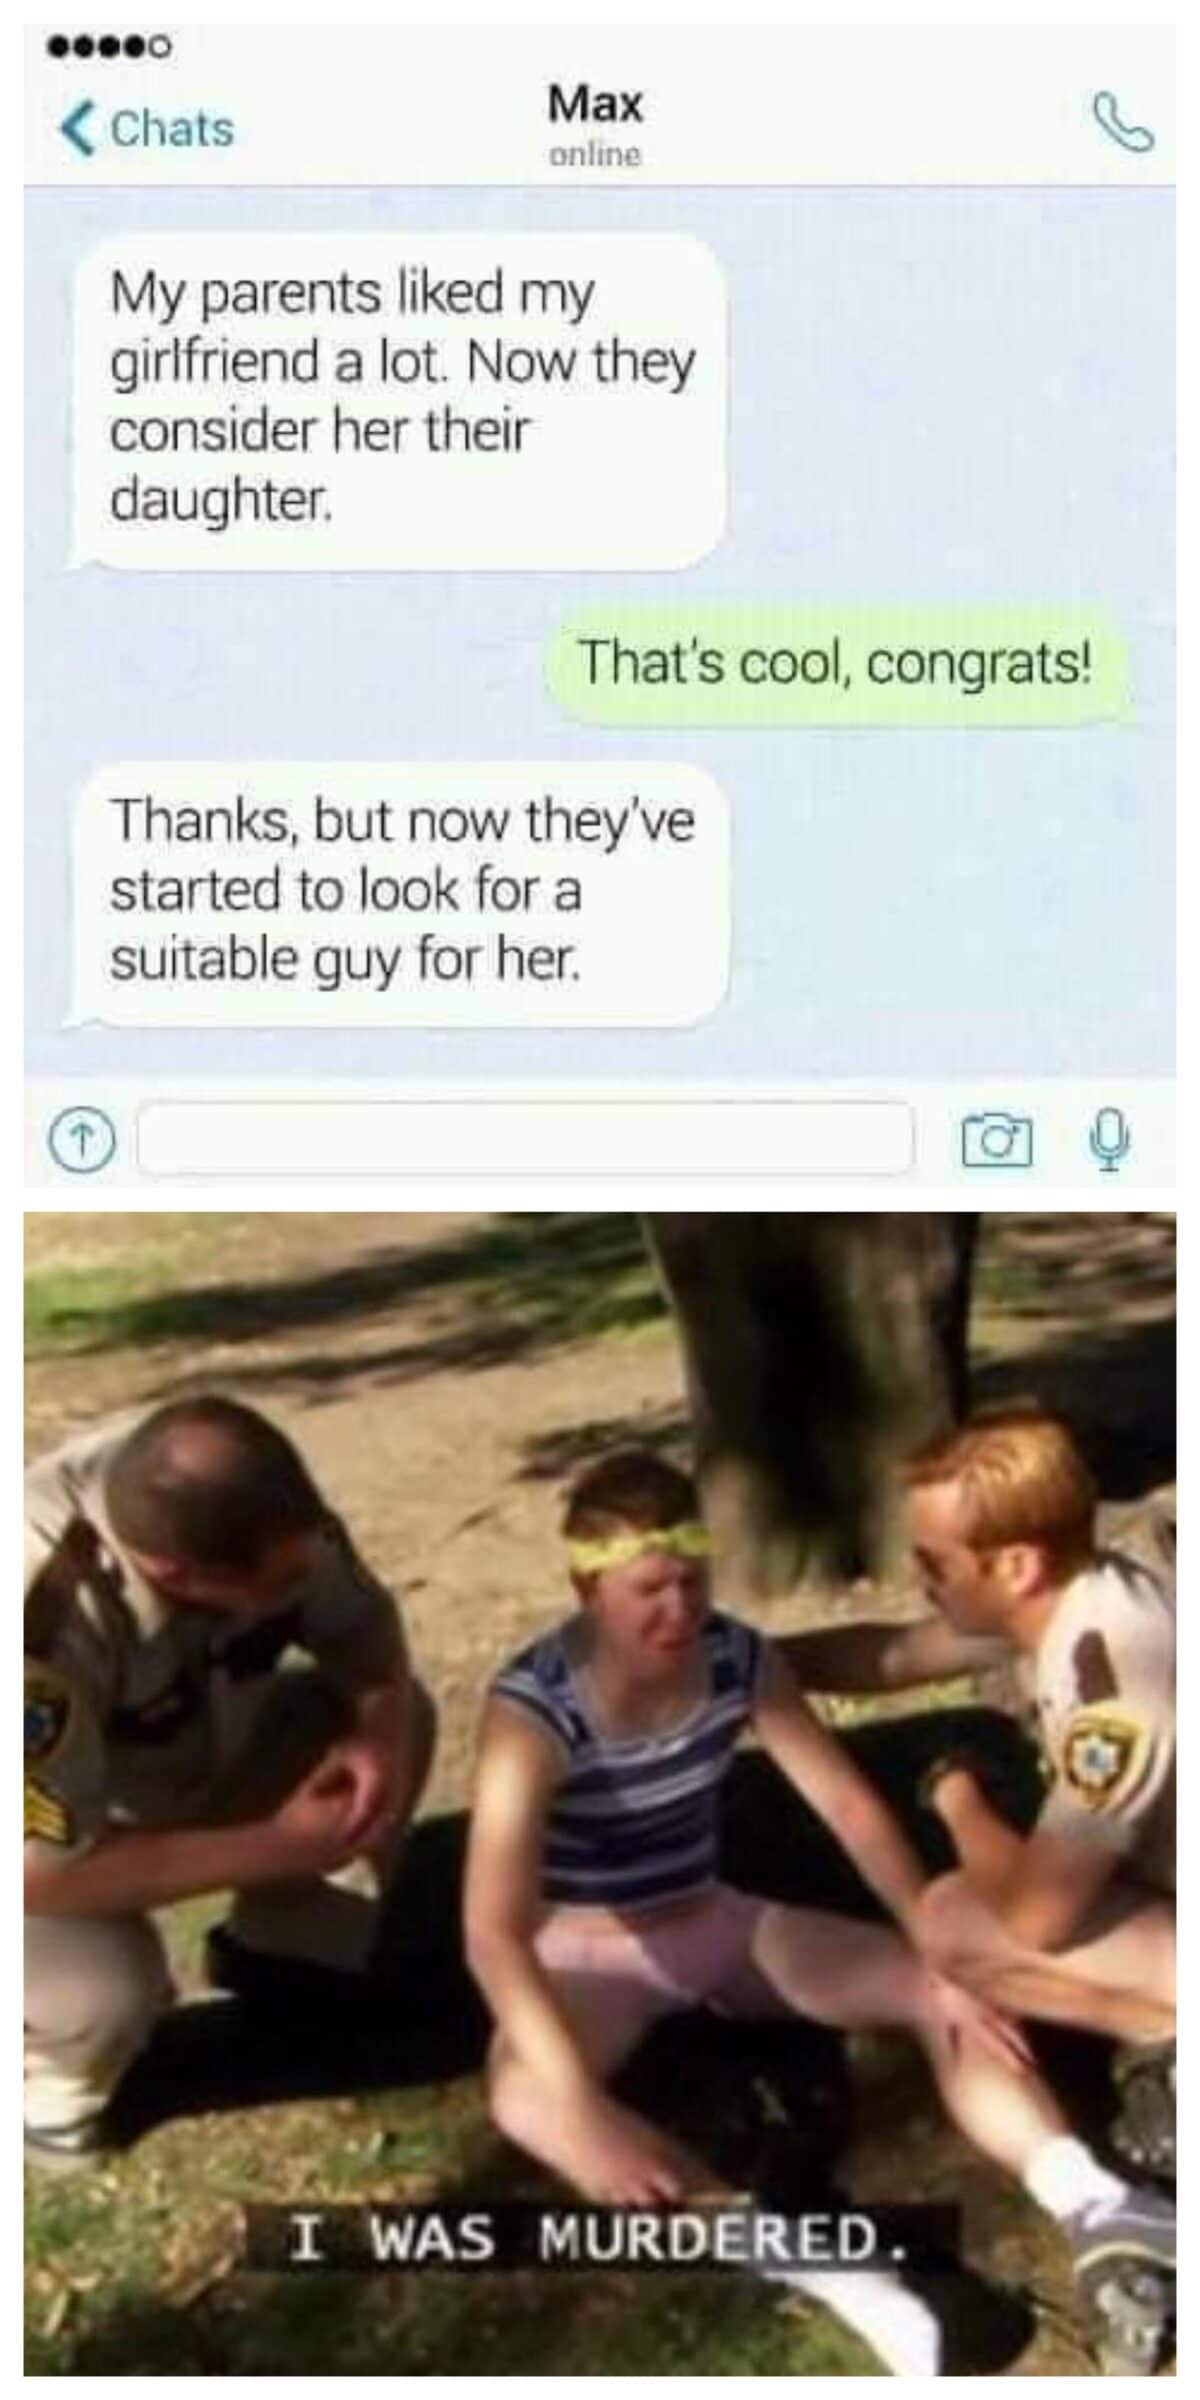 Dank, Meme, Reno 911, Girlfriend, Text Message other memes Dank, Alabama text: < Chats Max online My parents liked my girlfriend a lot. Now they consider her their daughter. That's cool, congrats! Thanks, but now they've started to look for a suitable guy for her 1 WAS MURDERED. 